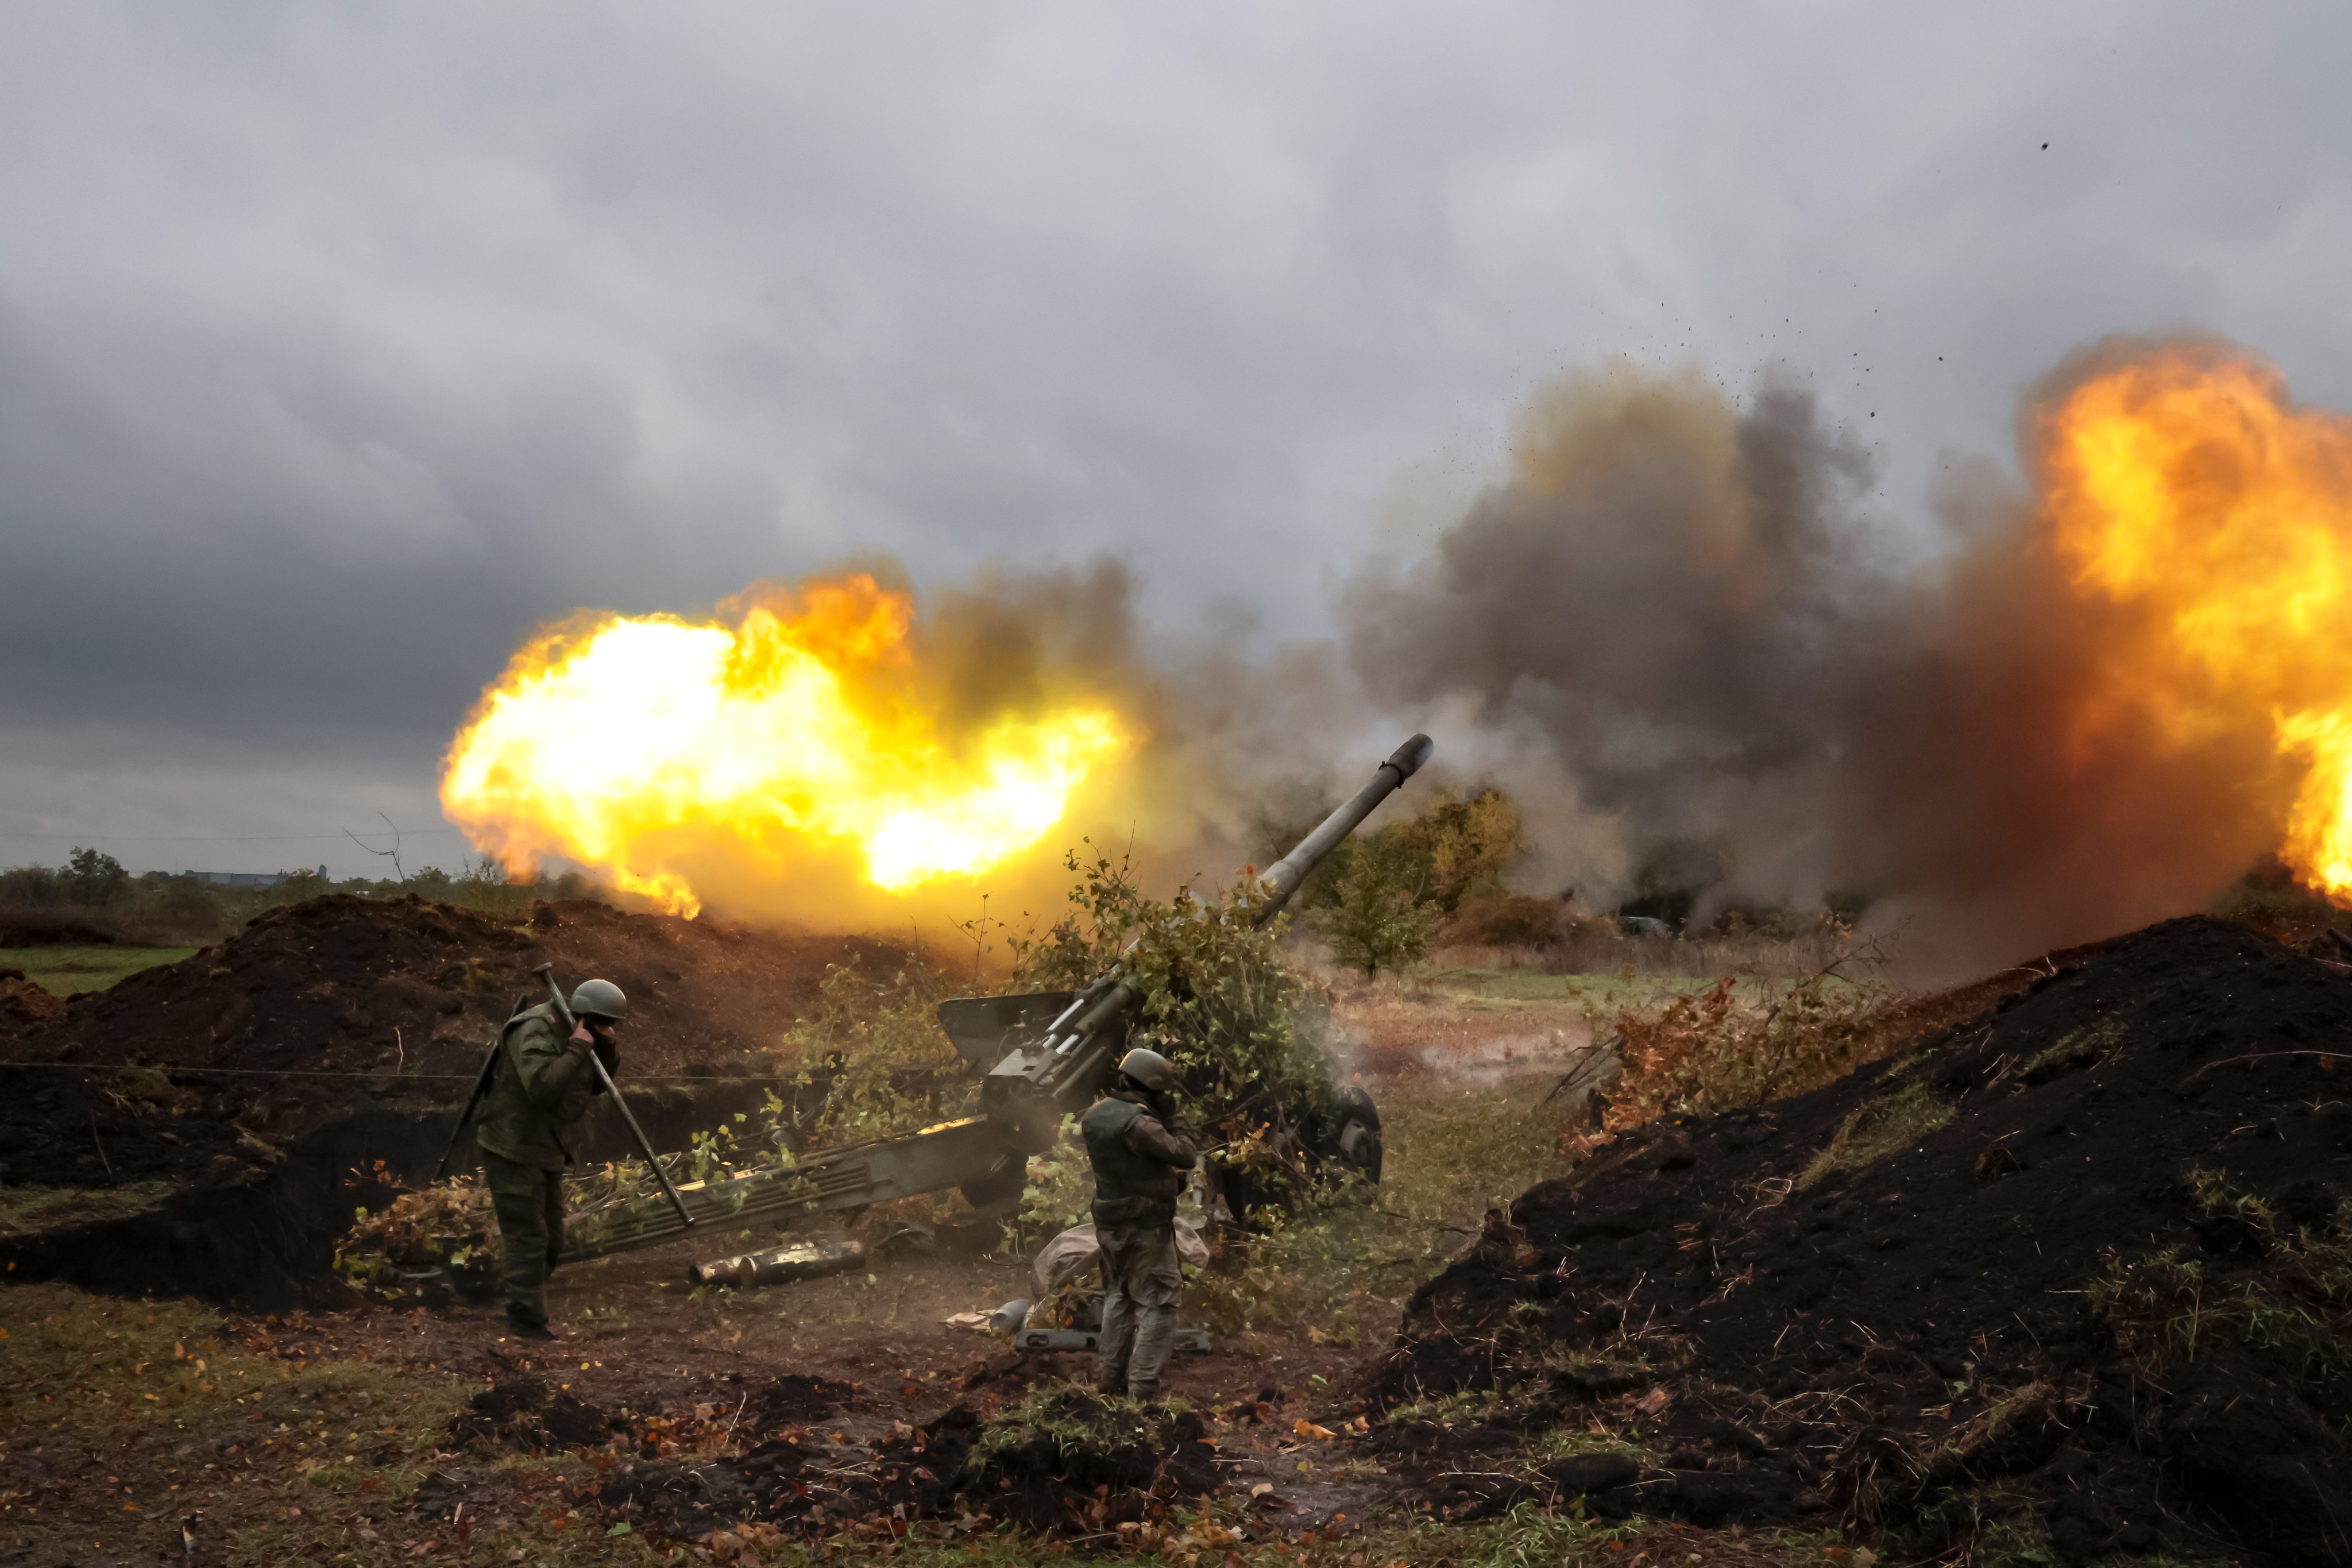 Russian troops fire artillery from their position at Ukrainian troops at an undisclosed location in the Russian-controlled Donetsk region of eastern Ukraine in October 2022. Photo: AP